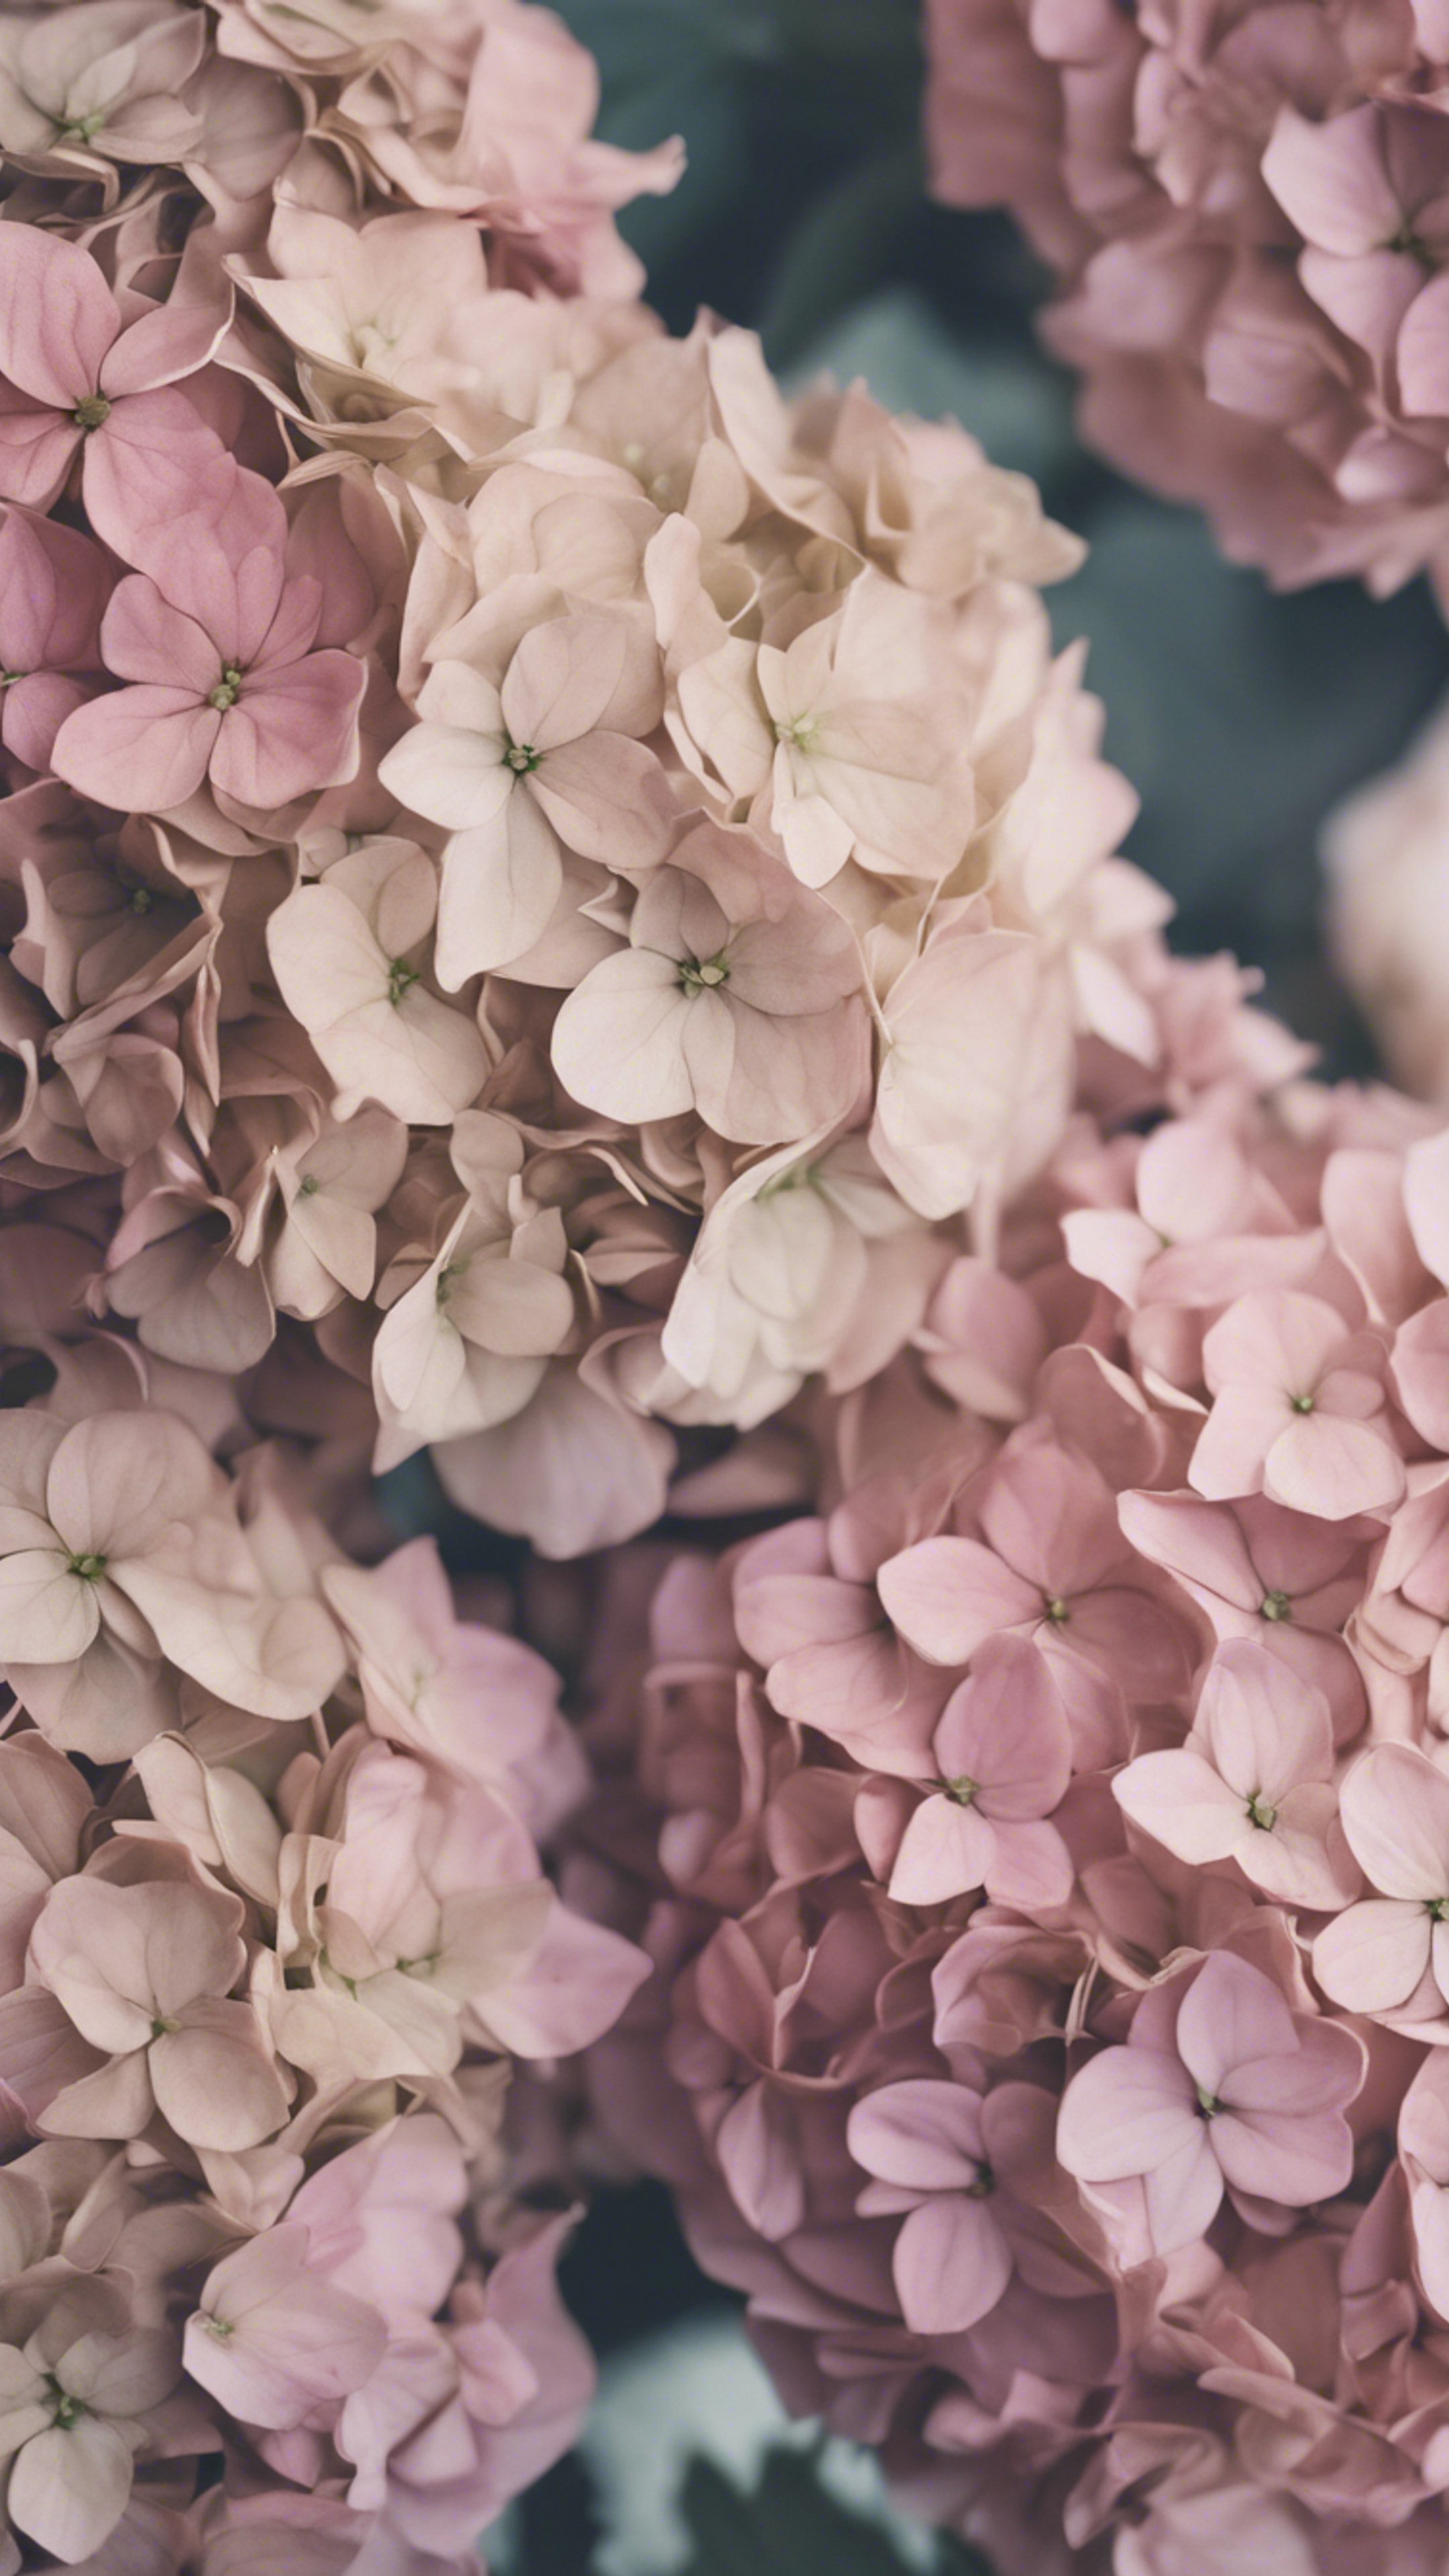 An antique floral pattern with delicate hydrangeas in a hue of vintage pink. Валлпапер[d61dab8ff010416797b3]